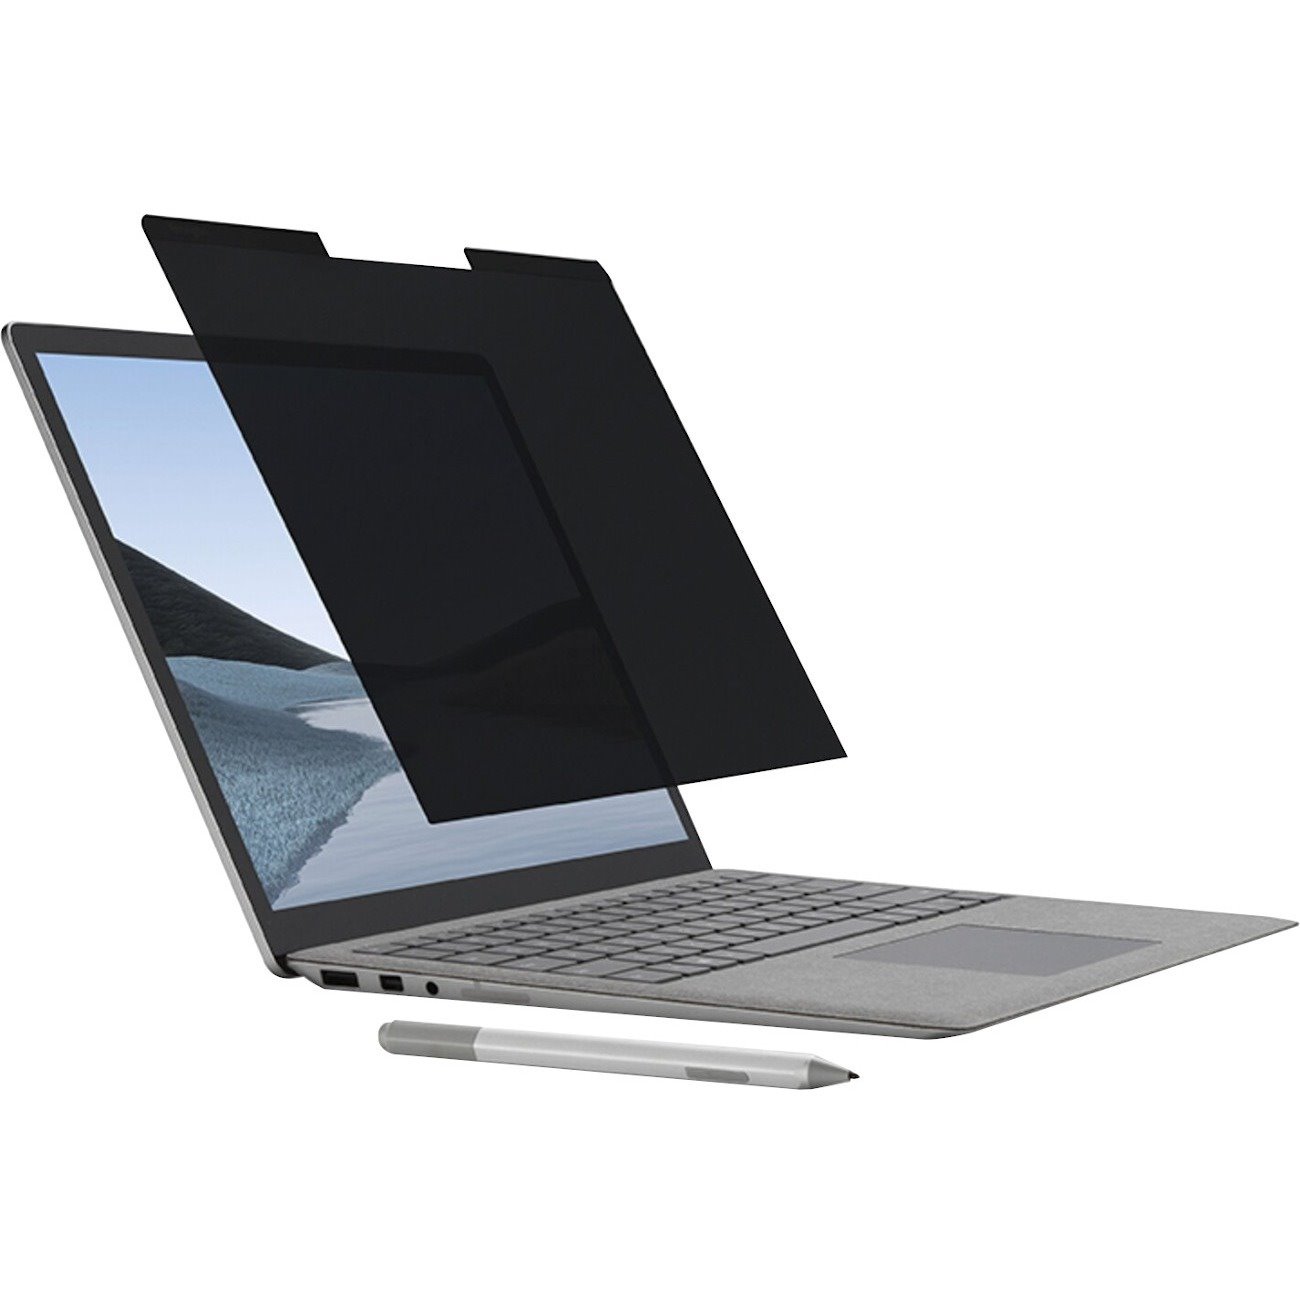 Kensington MagPro Elite Magnetic Privacy Screen for Surface Laptop